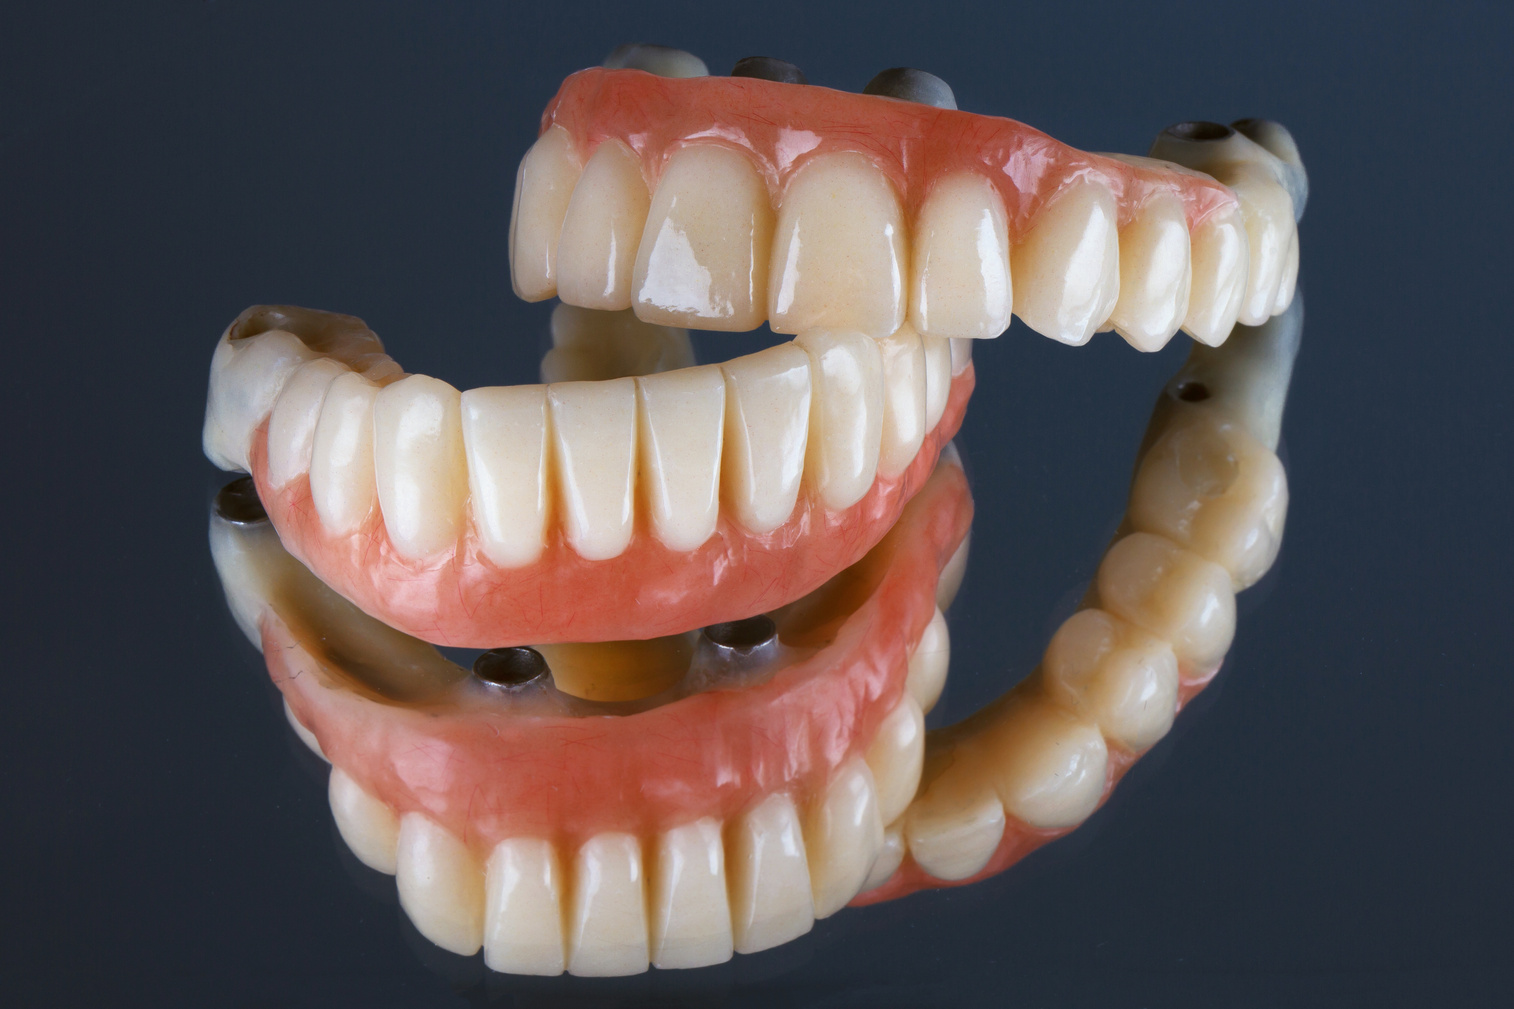 Dental Prostheses from Ceramics Supplemented with Artificial Gum